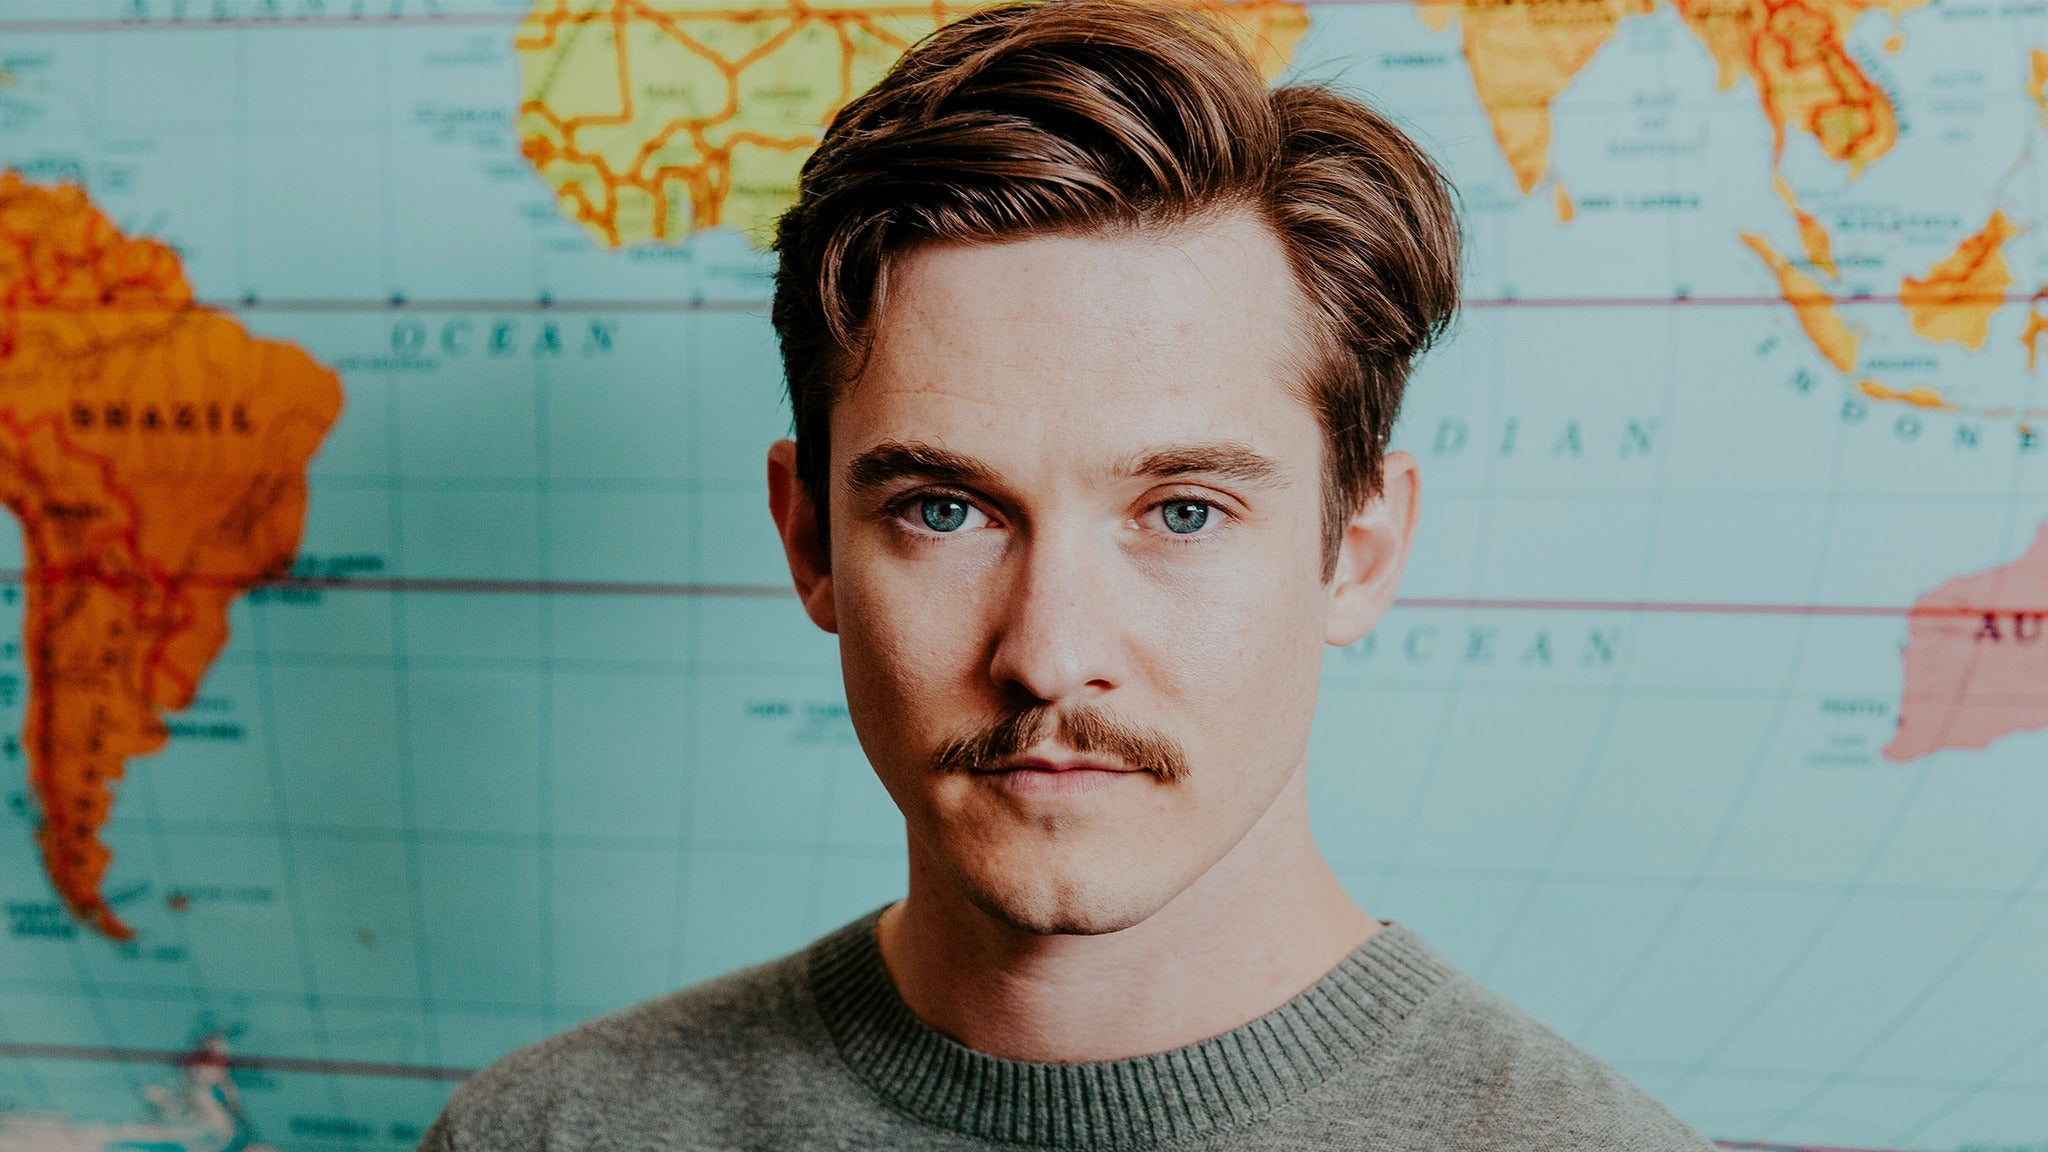 Image used with permission from Ticketmaster | Chris Farren tickets